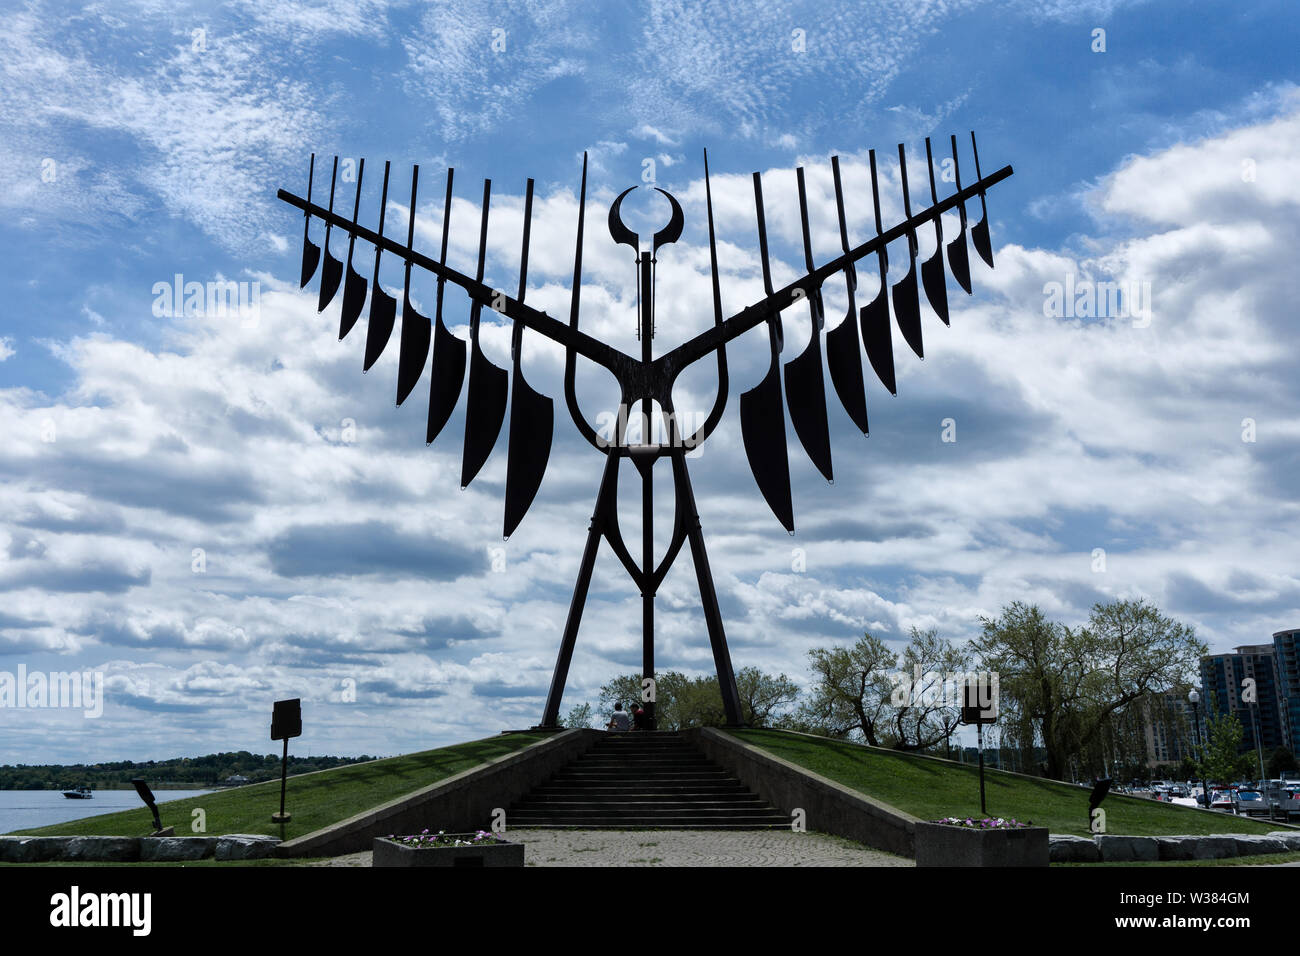 Canada Ontario Barrie at June 2019 the dragon skulpture at the lake Simcoe, a Skycatcher Stock Photo